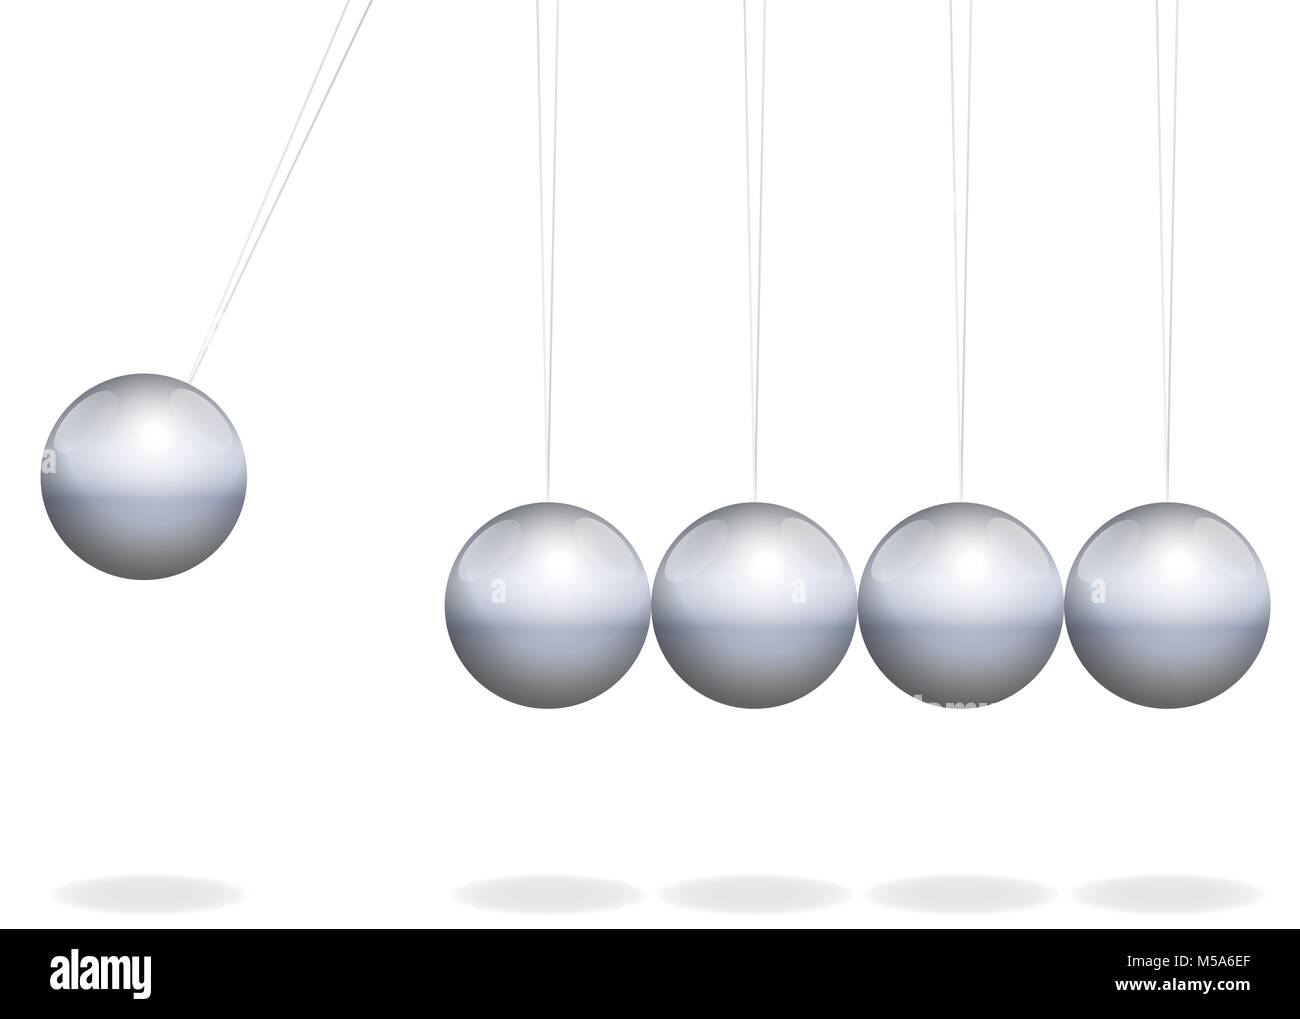 Newtons cradle. Physical toy with metal balls as pendulum - illustration on white background. Stock Photo